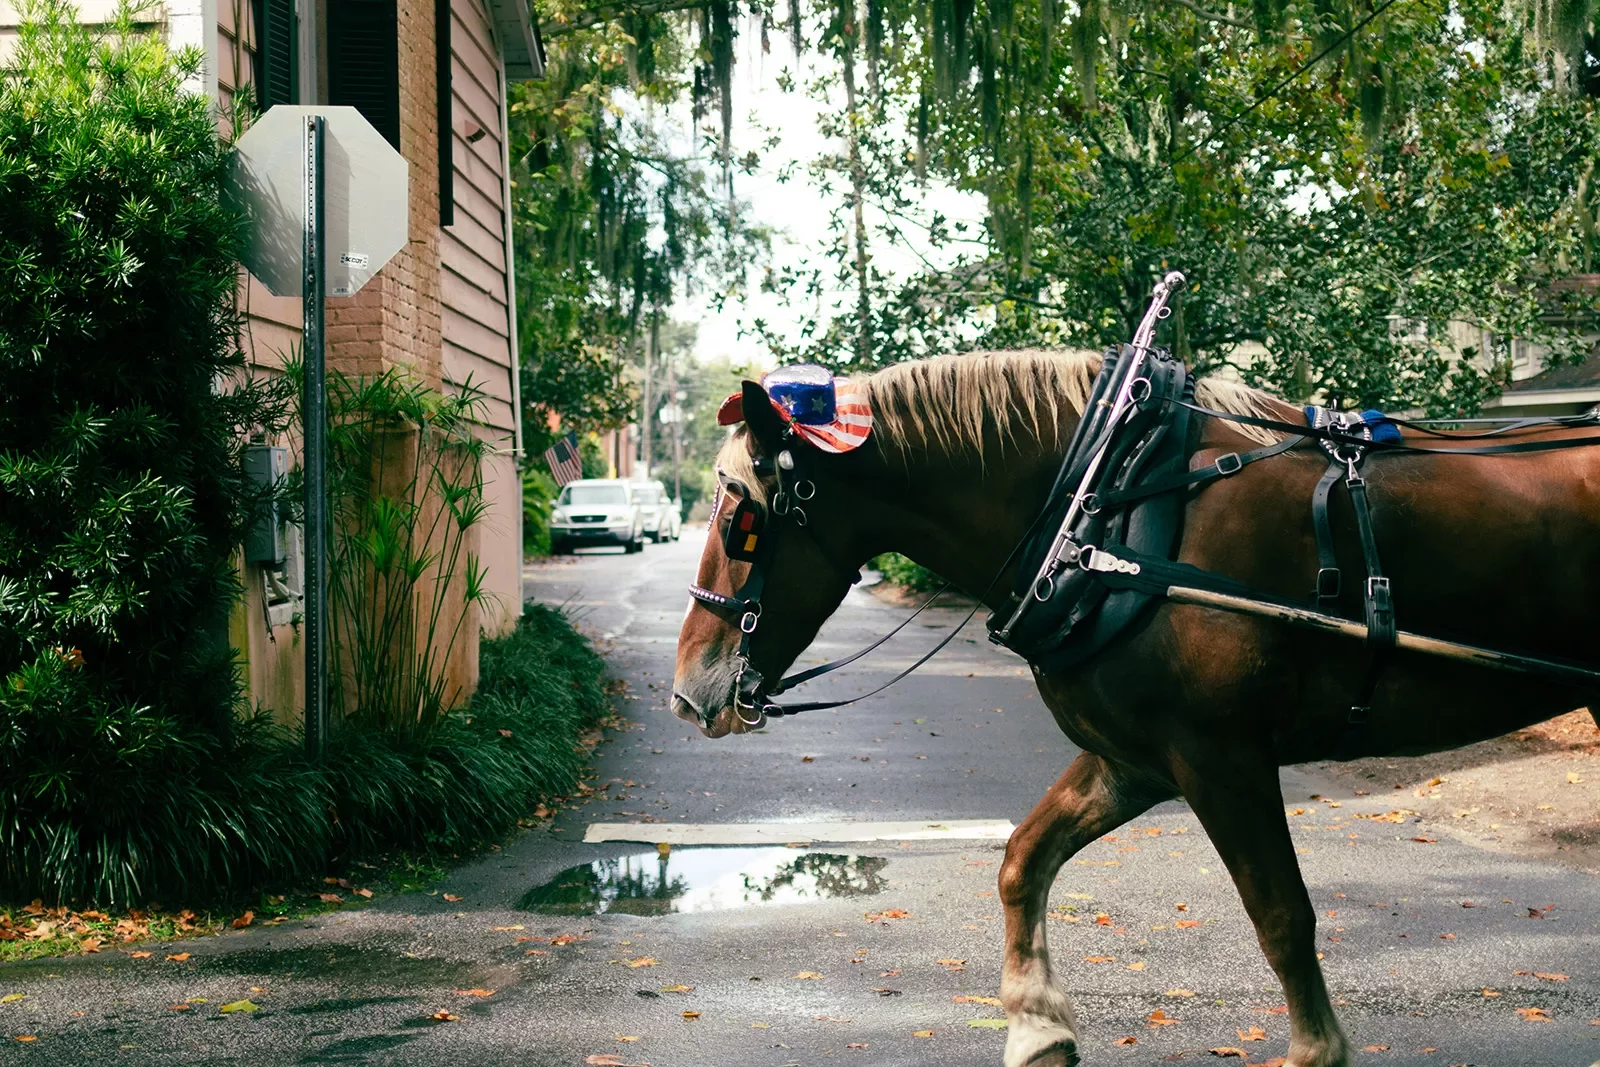 Shot of horse with American flag hat on, walking down street.